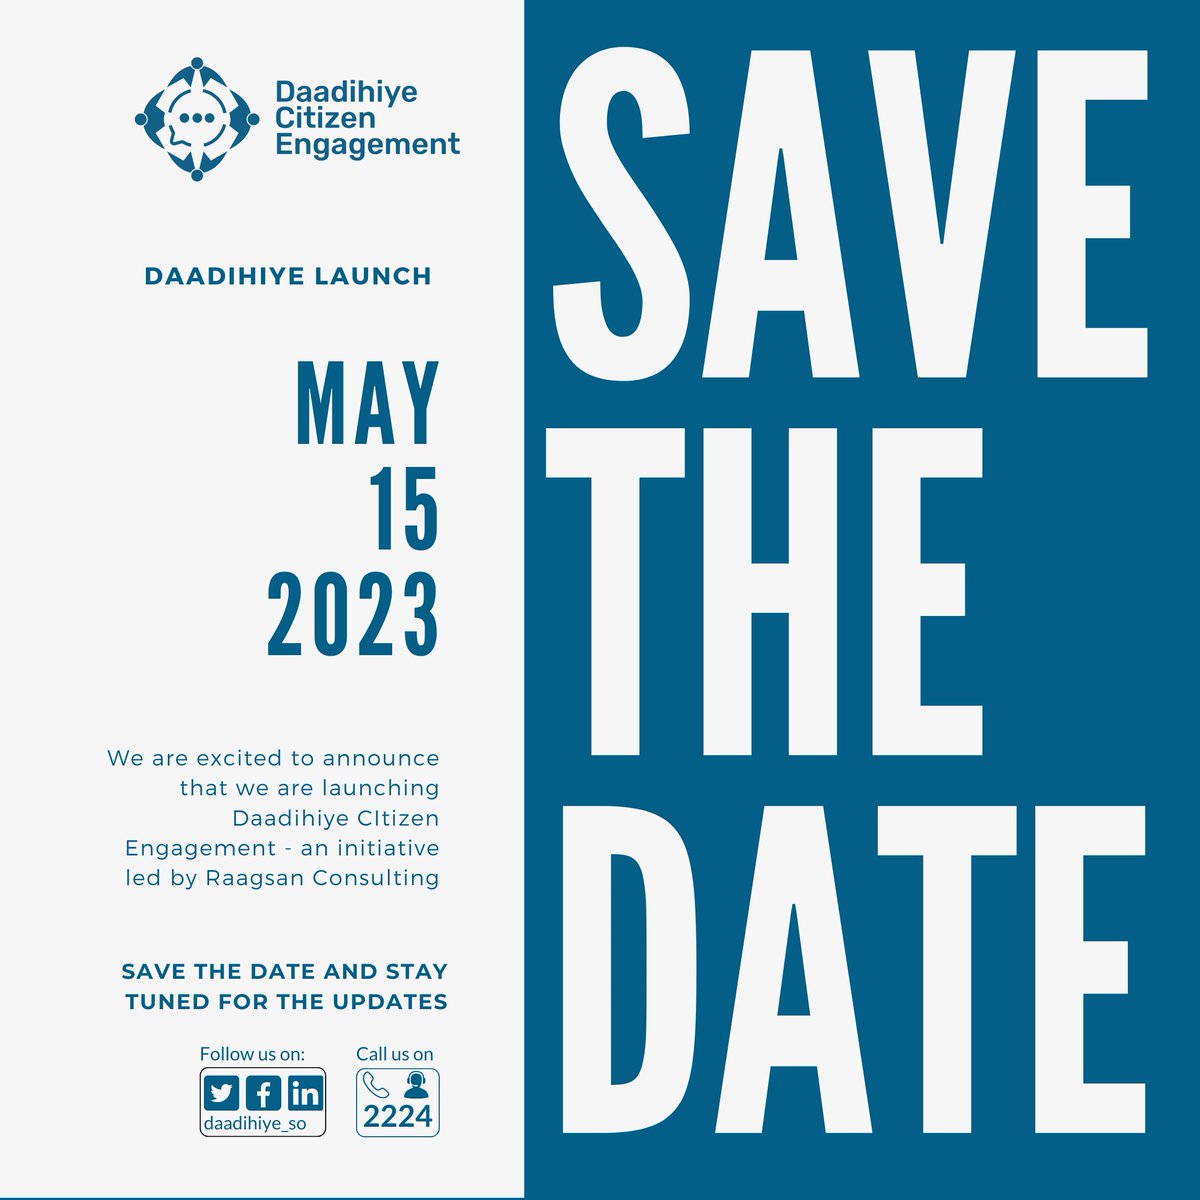 #SavetheDate📷📷 We're excited to announce the launch of @daadihiye_so  #CitizenEngagement-
@raagsan fully funded &designed platform 4 amplifying the voice of #citizens on #May15th! Join us to hear about our model. Stay tuned for more details. #DaadihiyeLaunch #EmpoweringCitizens